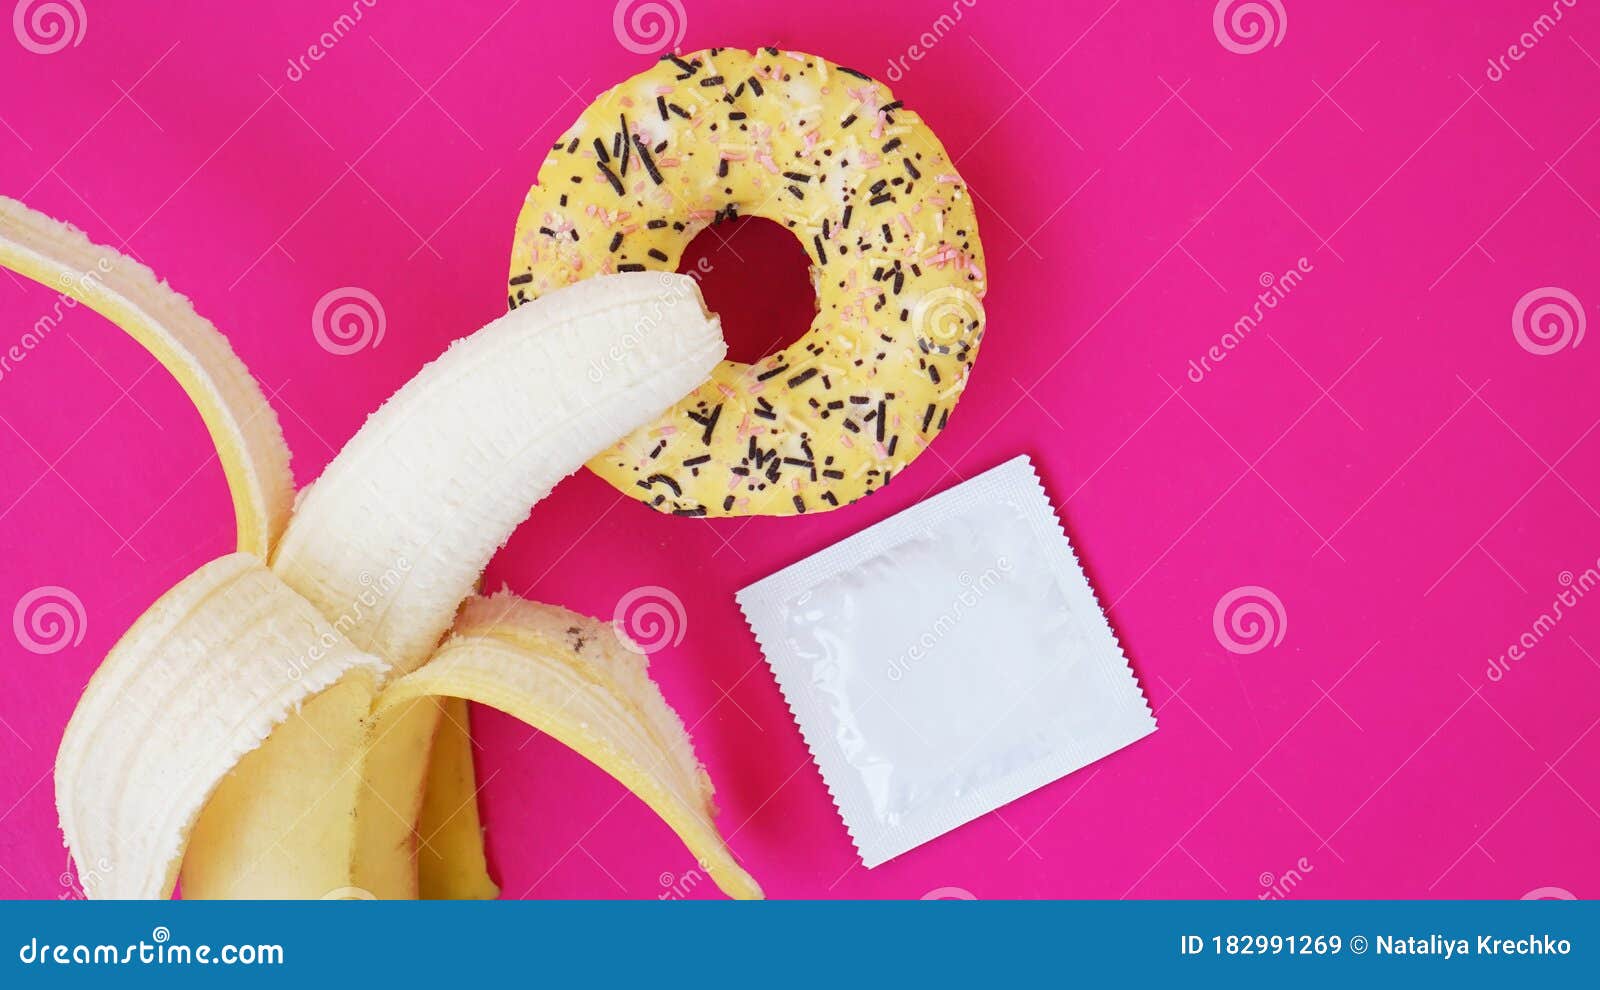 Banana Donut And Condom Sex Idea Bright Picture On A Colorful 